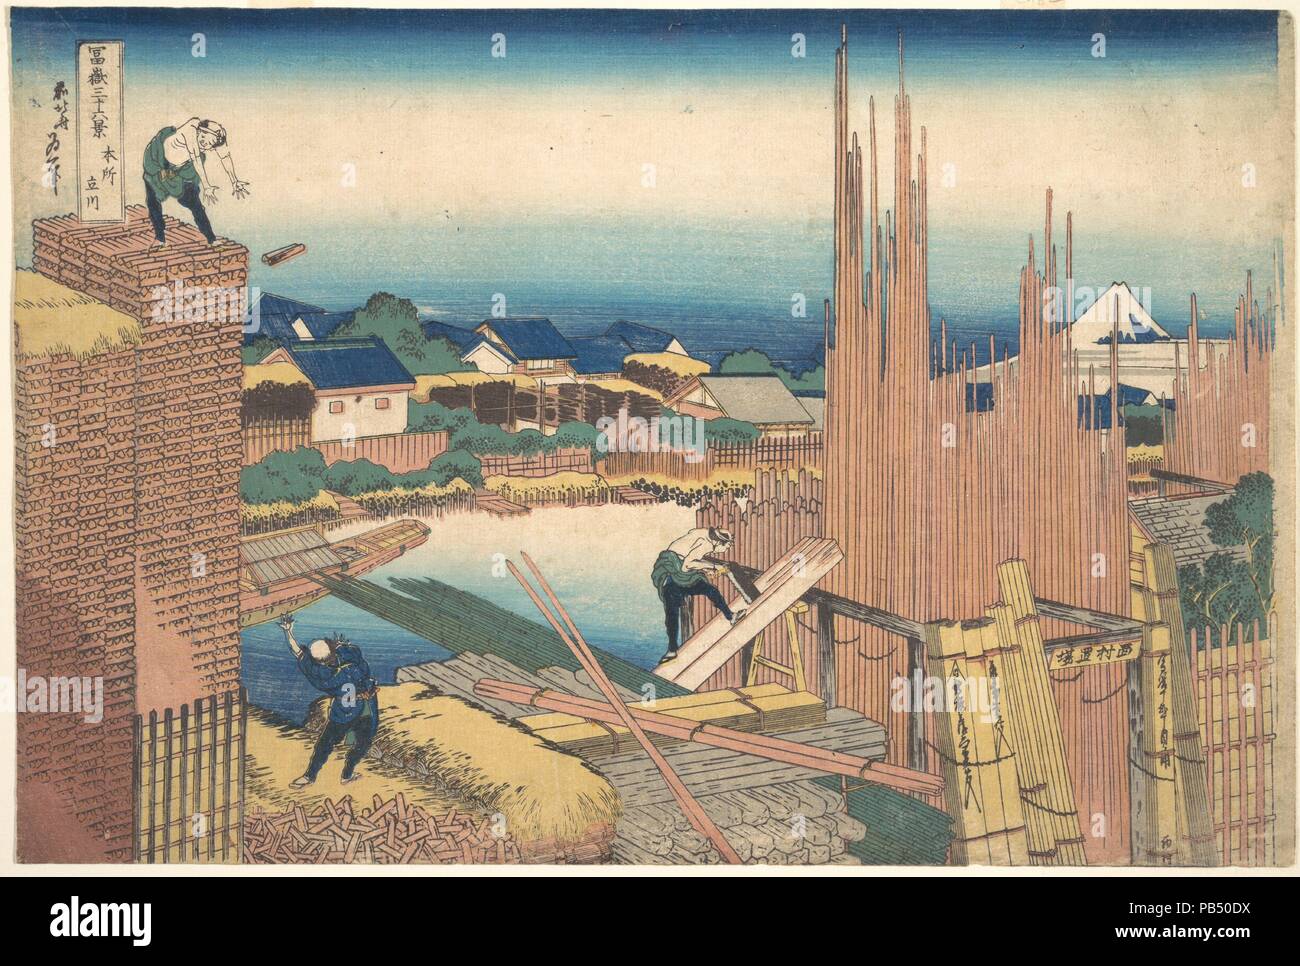 Tatekawa in Honjo (Honjo Tatekawa), from the series Thirty-six Views of Mount Fuji (Fugaku sanjurokkei). Artist: Katsushika Hokusai (Japanese, Tokyo (Edo) 1760-1849 Tokyo (Edo)). Culture: Japan. Dimensions: 10 1/16 x 15 in. (25.6 x 38.1 cm). Date: ca. 1830-32.  Honjo was a district for lumberyards. Mount Fuji peeks through the planks stacked up in such a yard next to the Tate canal. The figures in the print are completely absorbed in their work, unaffected by the handsome vista of Fuji. At the lower right, some planks of wood stand within a frame bearing various markings and inscriptions: 'the Stock Photo